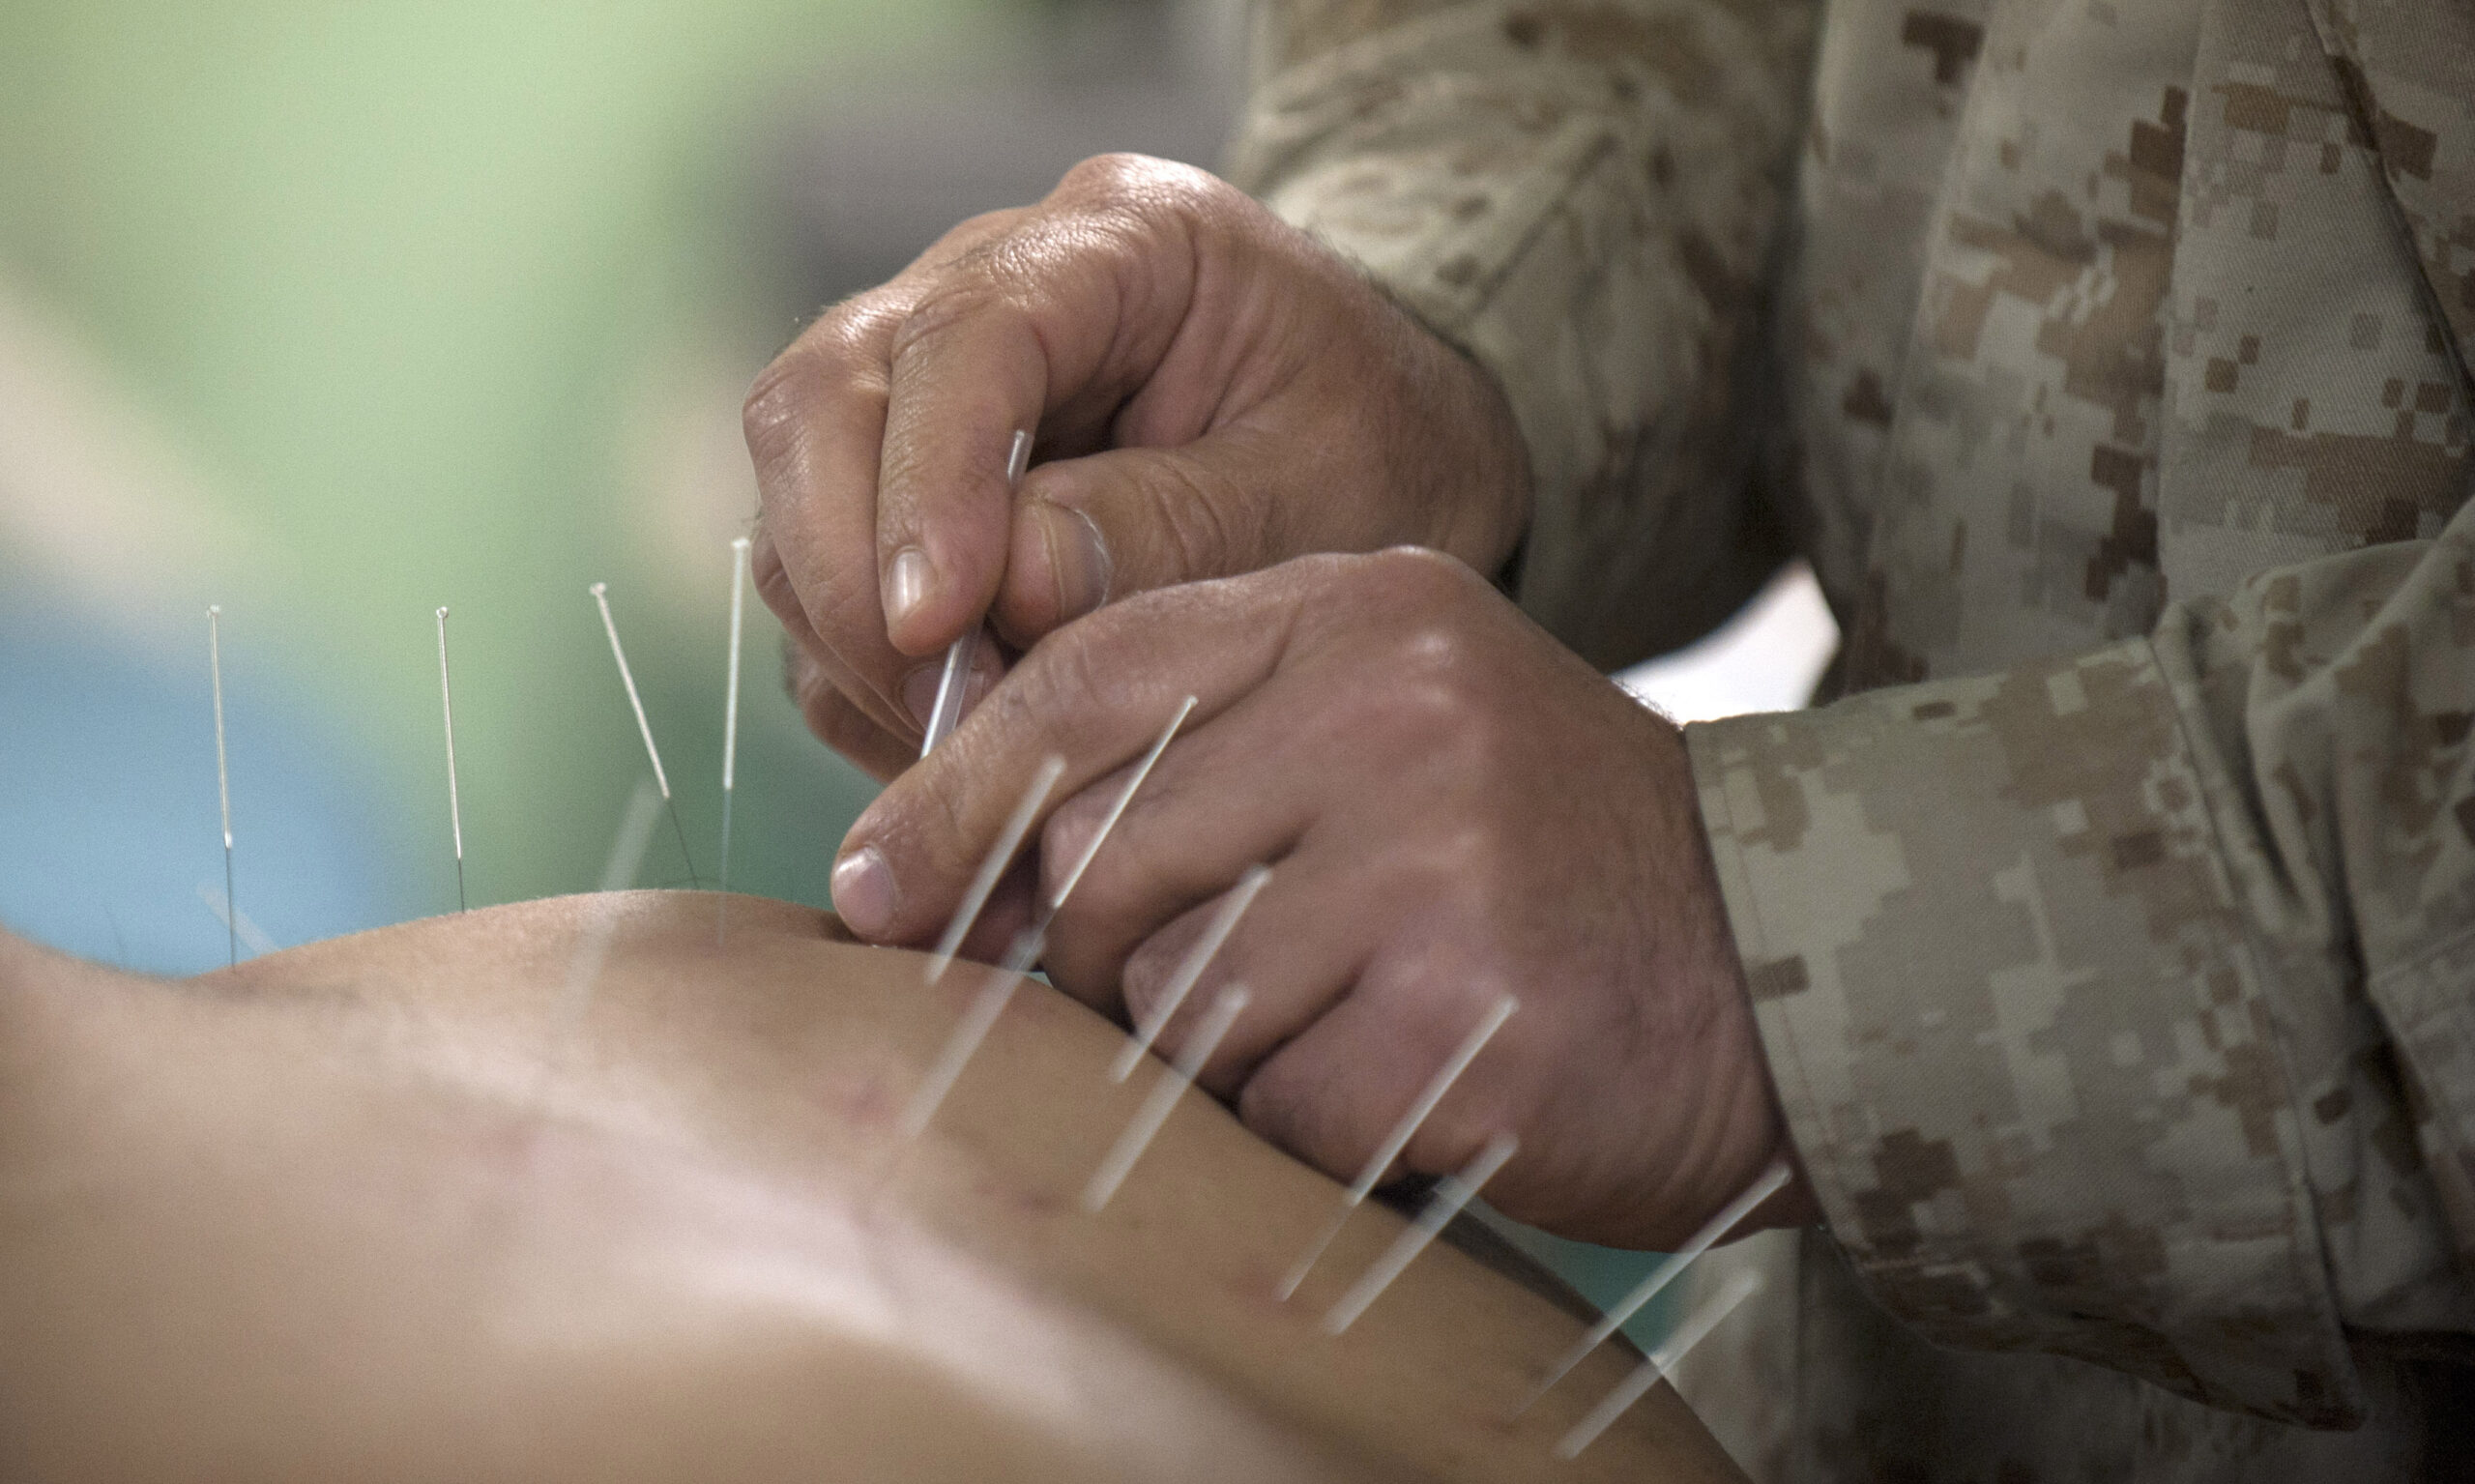 person wearing army fatigues inserting acupuncture needles into someone's back